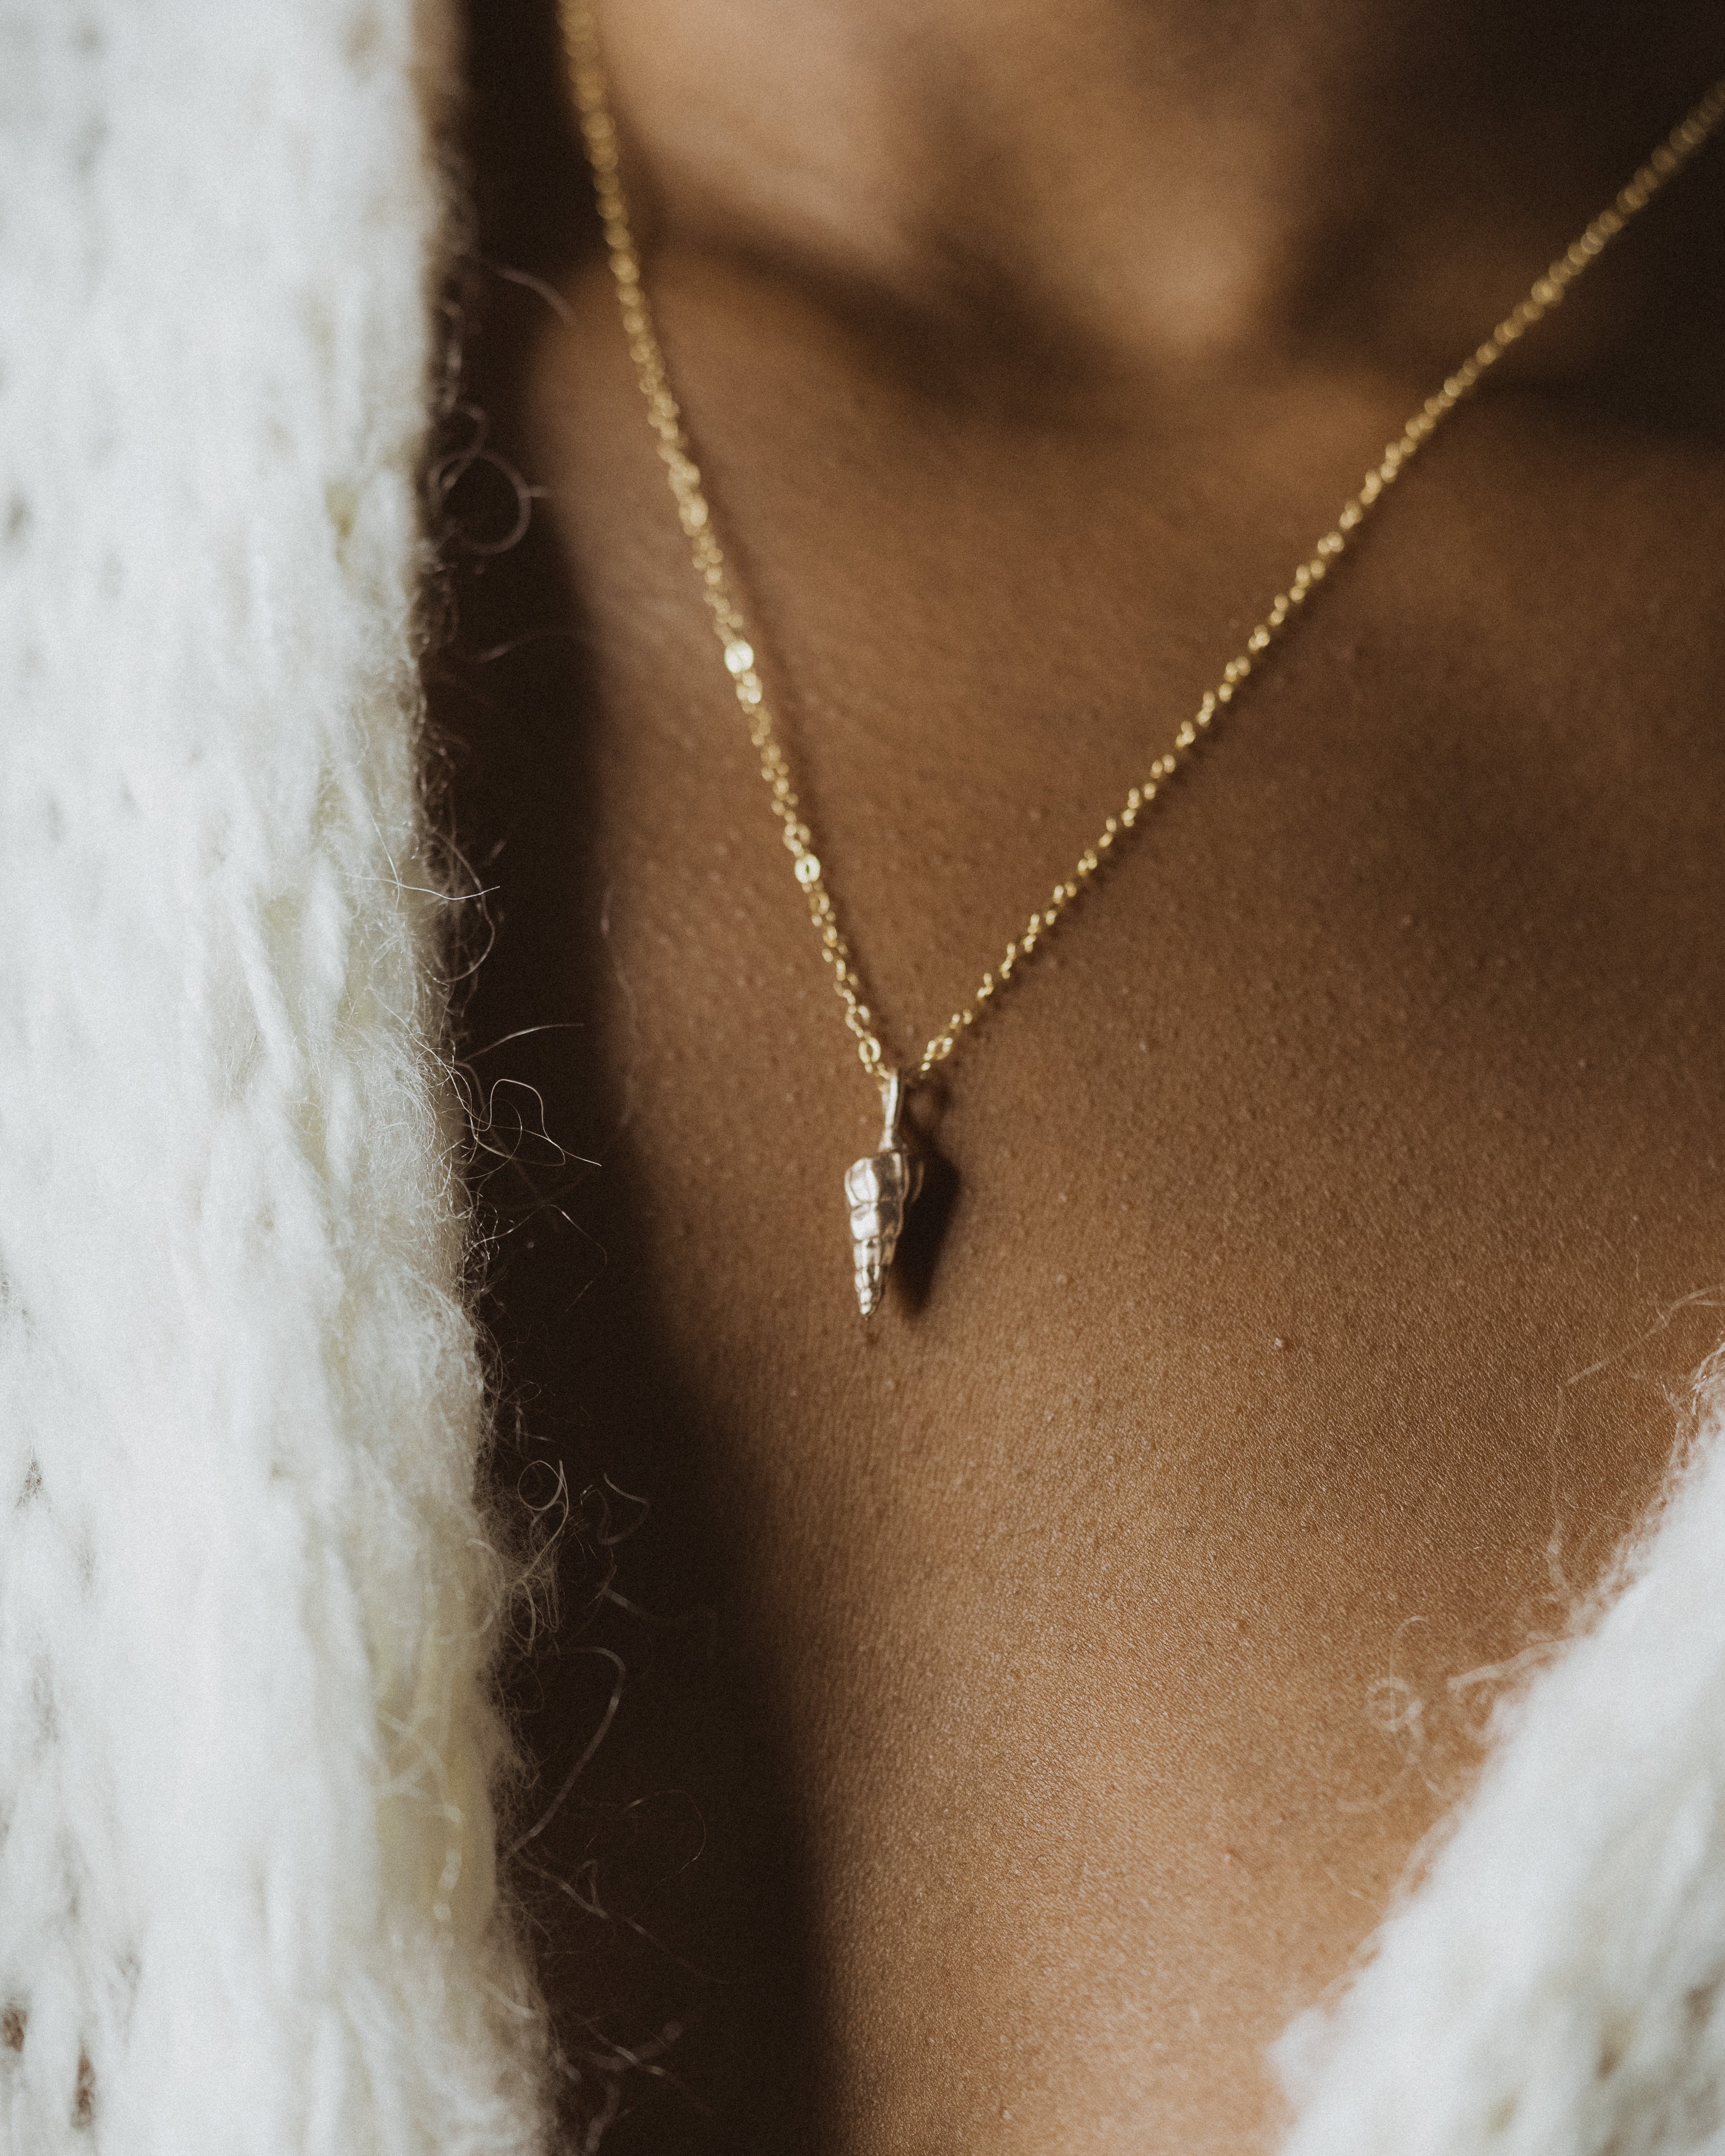 a close up of a woman's neck wearing a white knit cardigan and small bronze sea shell pendant necklace